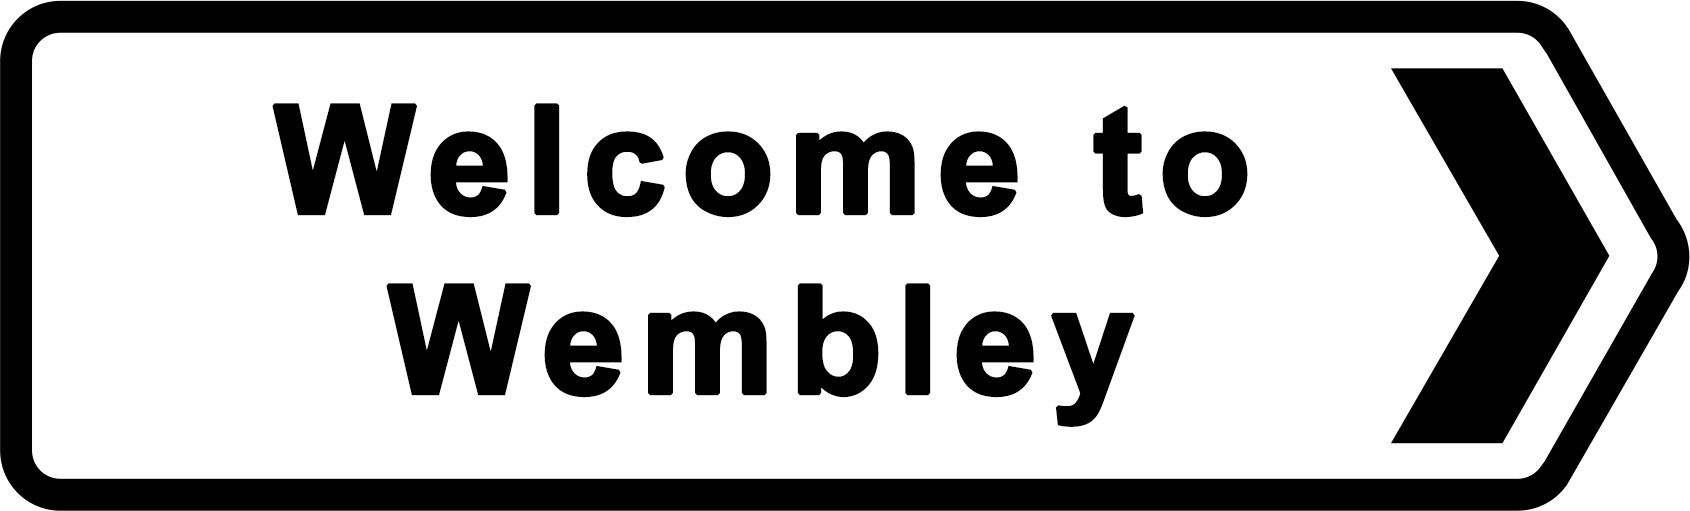 Wembley Stadium - Cheap Driving Schools Lessons in Wembley, Middlesex HA0 & HA9, London borough of Brent, Greater London